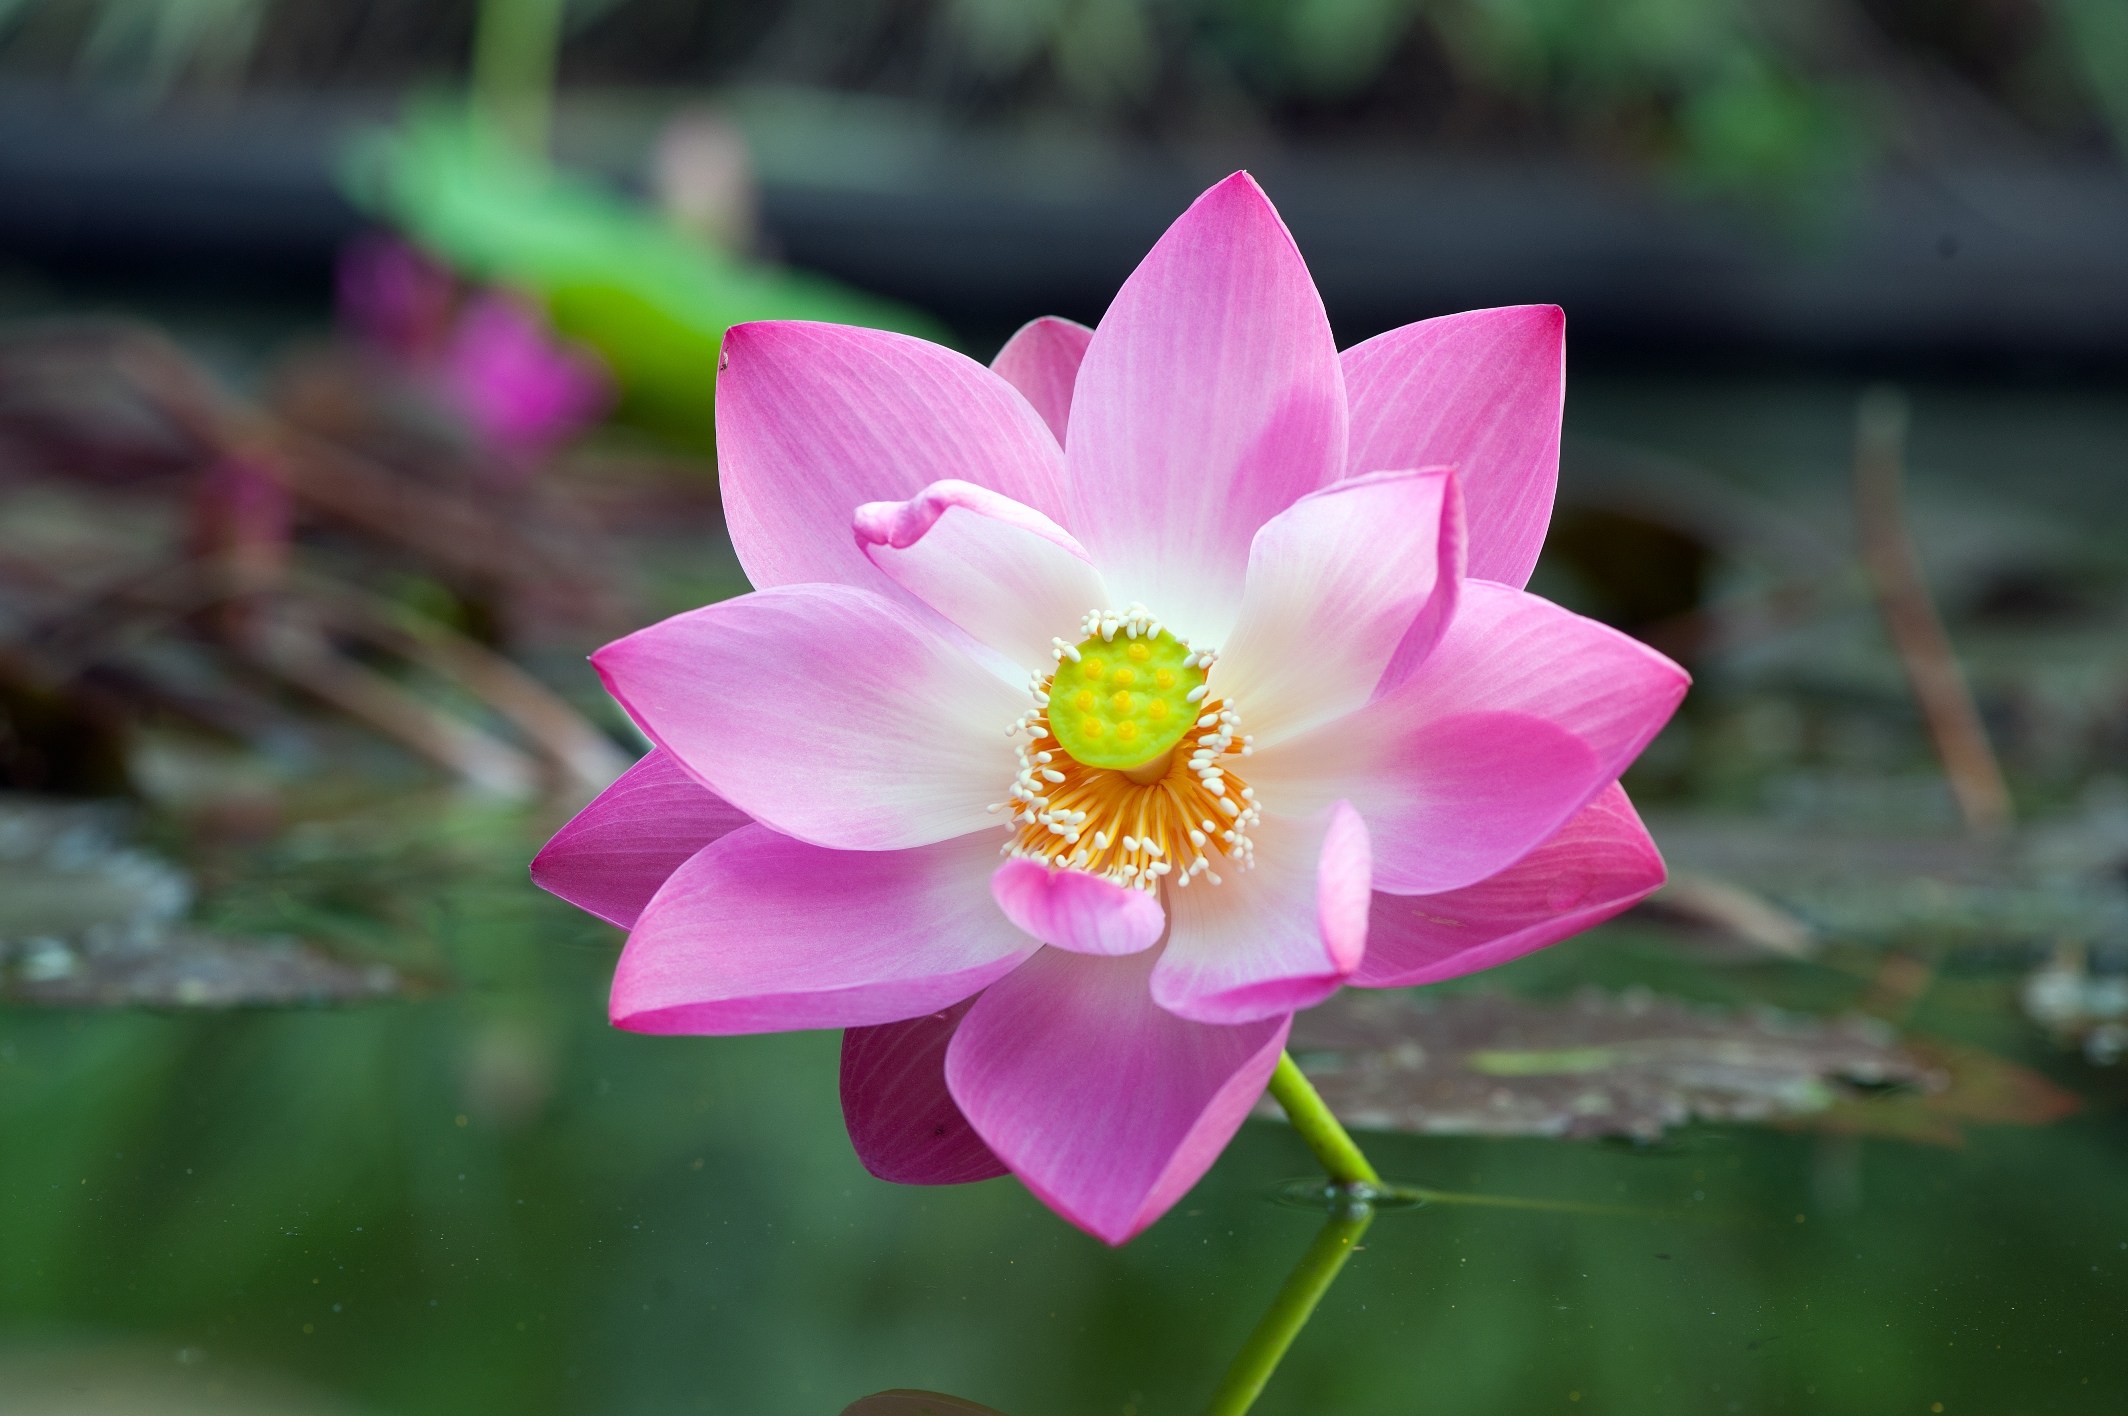 Reef’s lily ponds live up to their name with various types of lotus flowers including for this gorgeous pink Nelumbo nucifera.